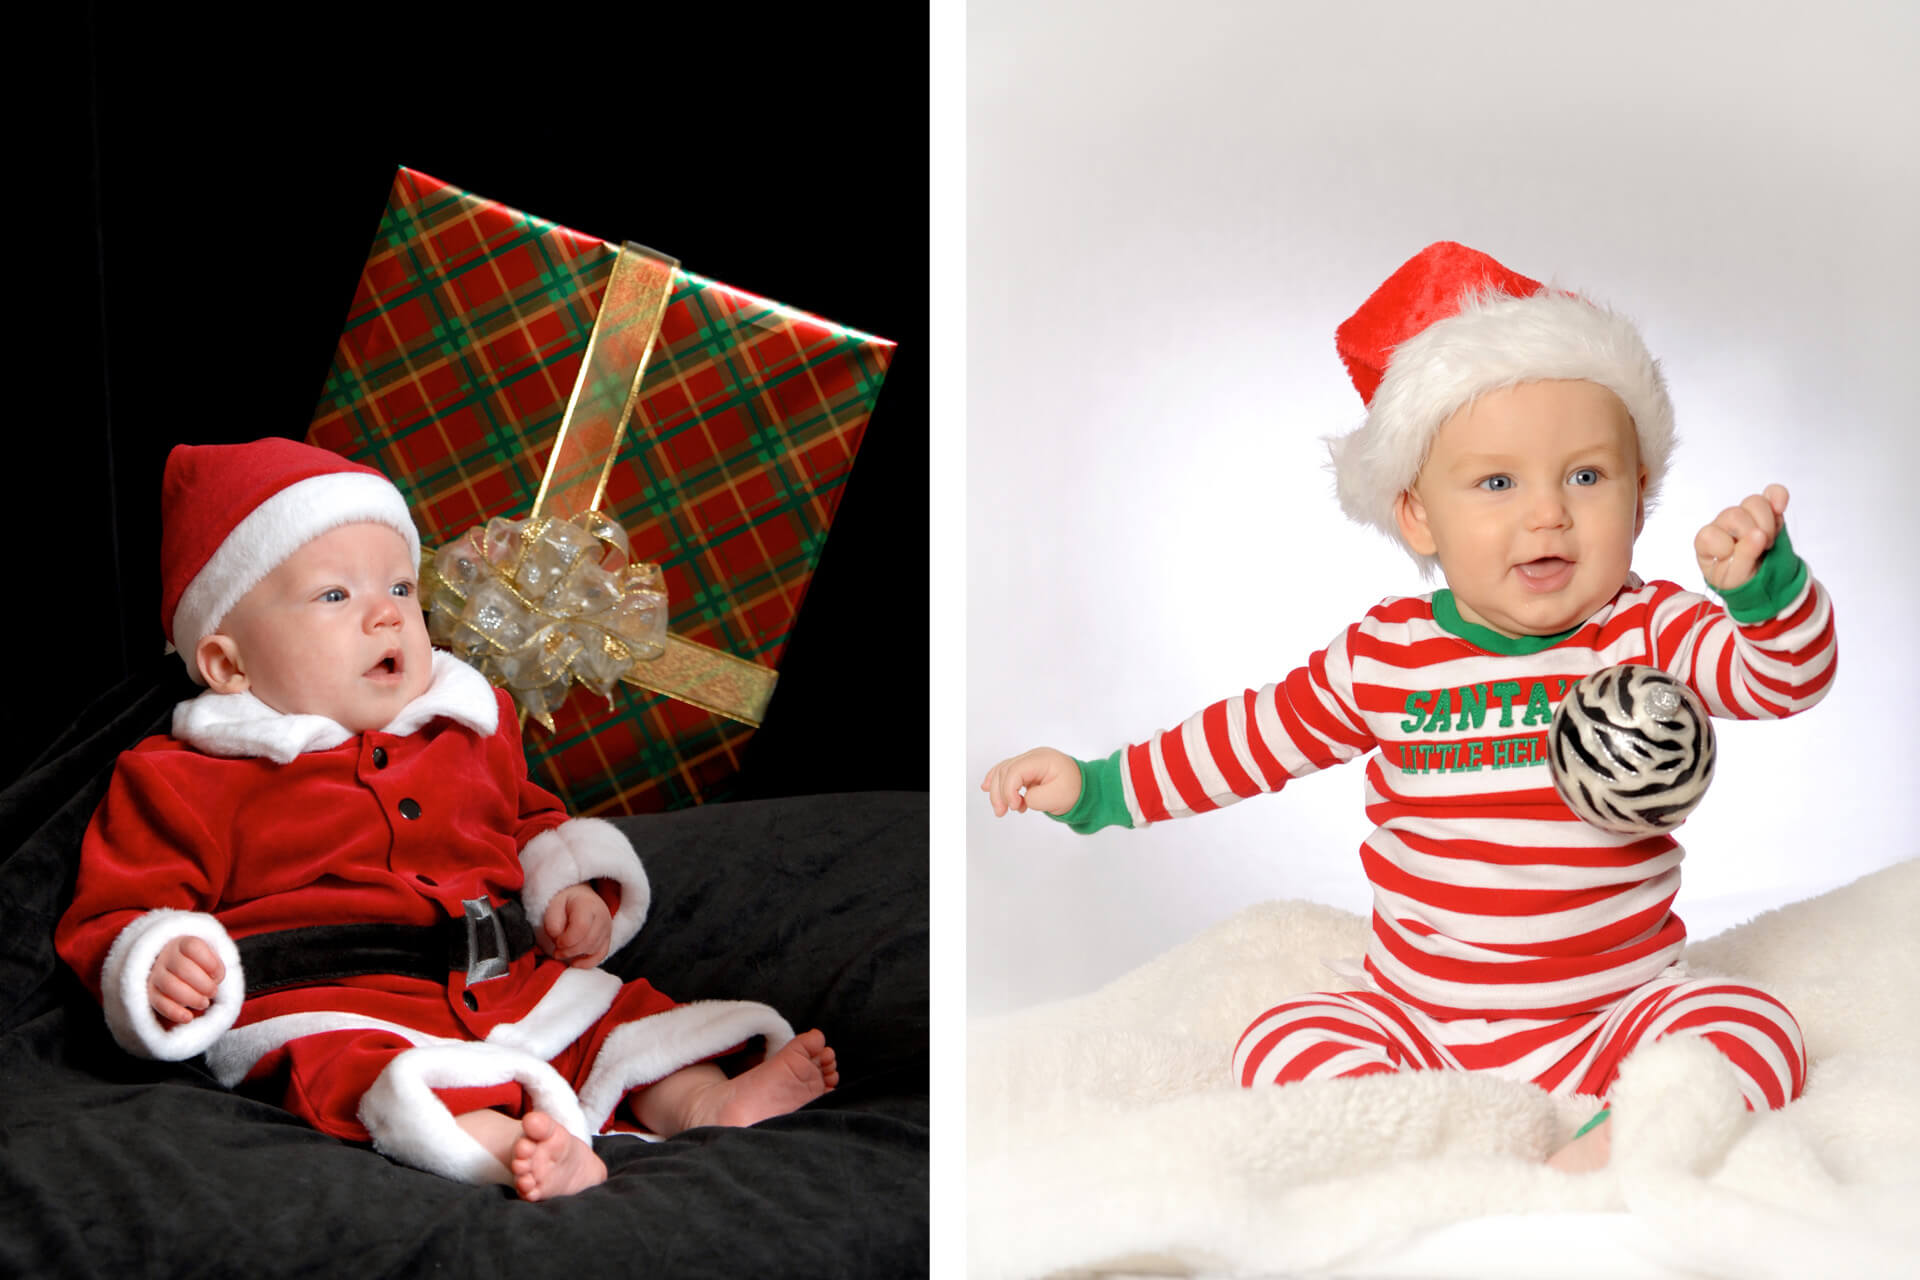 Best Detroit newborn photographer's fun and candid baby photos during the holidays make great holiday gifts for parents and grandparents metro Detroit, Michigan.